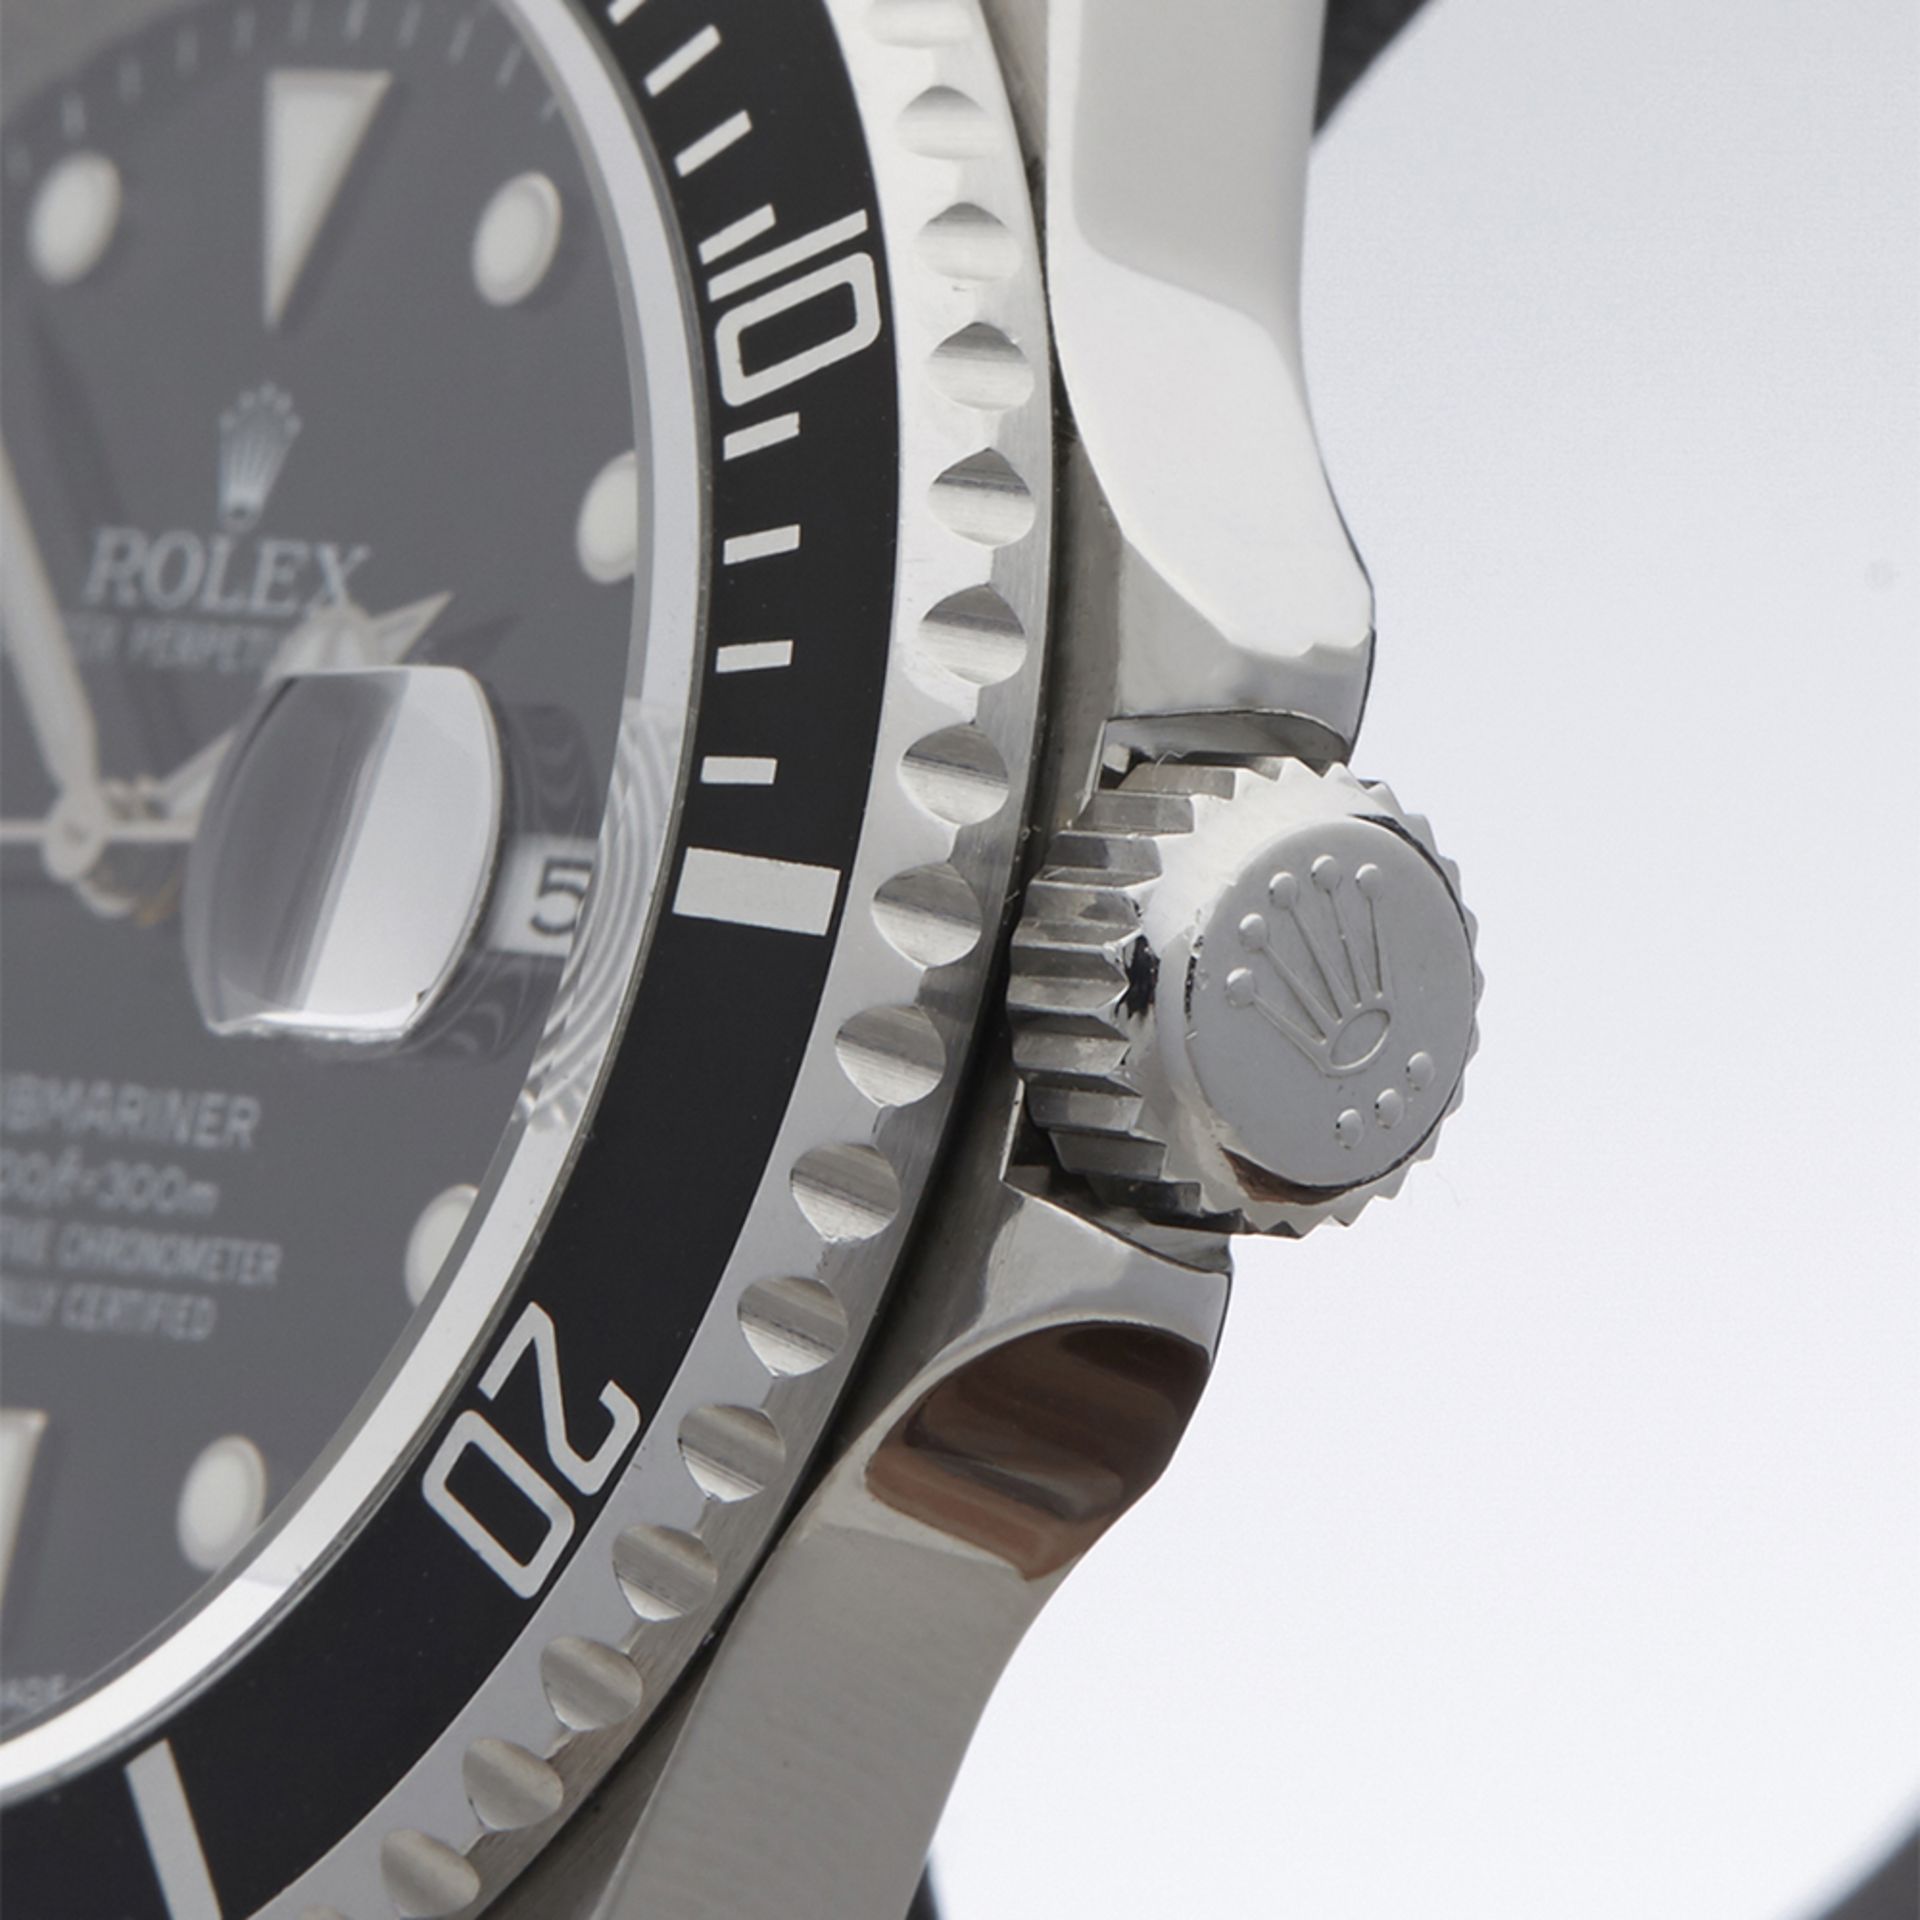 Rolex, Submariner 40mm Stainless Steel 16610 - Image 4 of 9